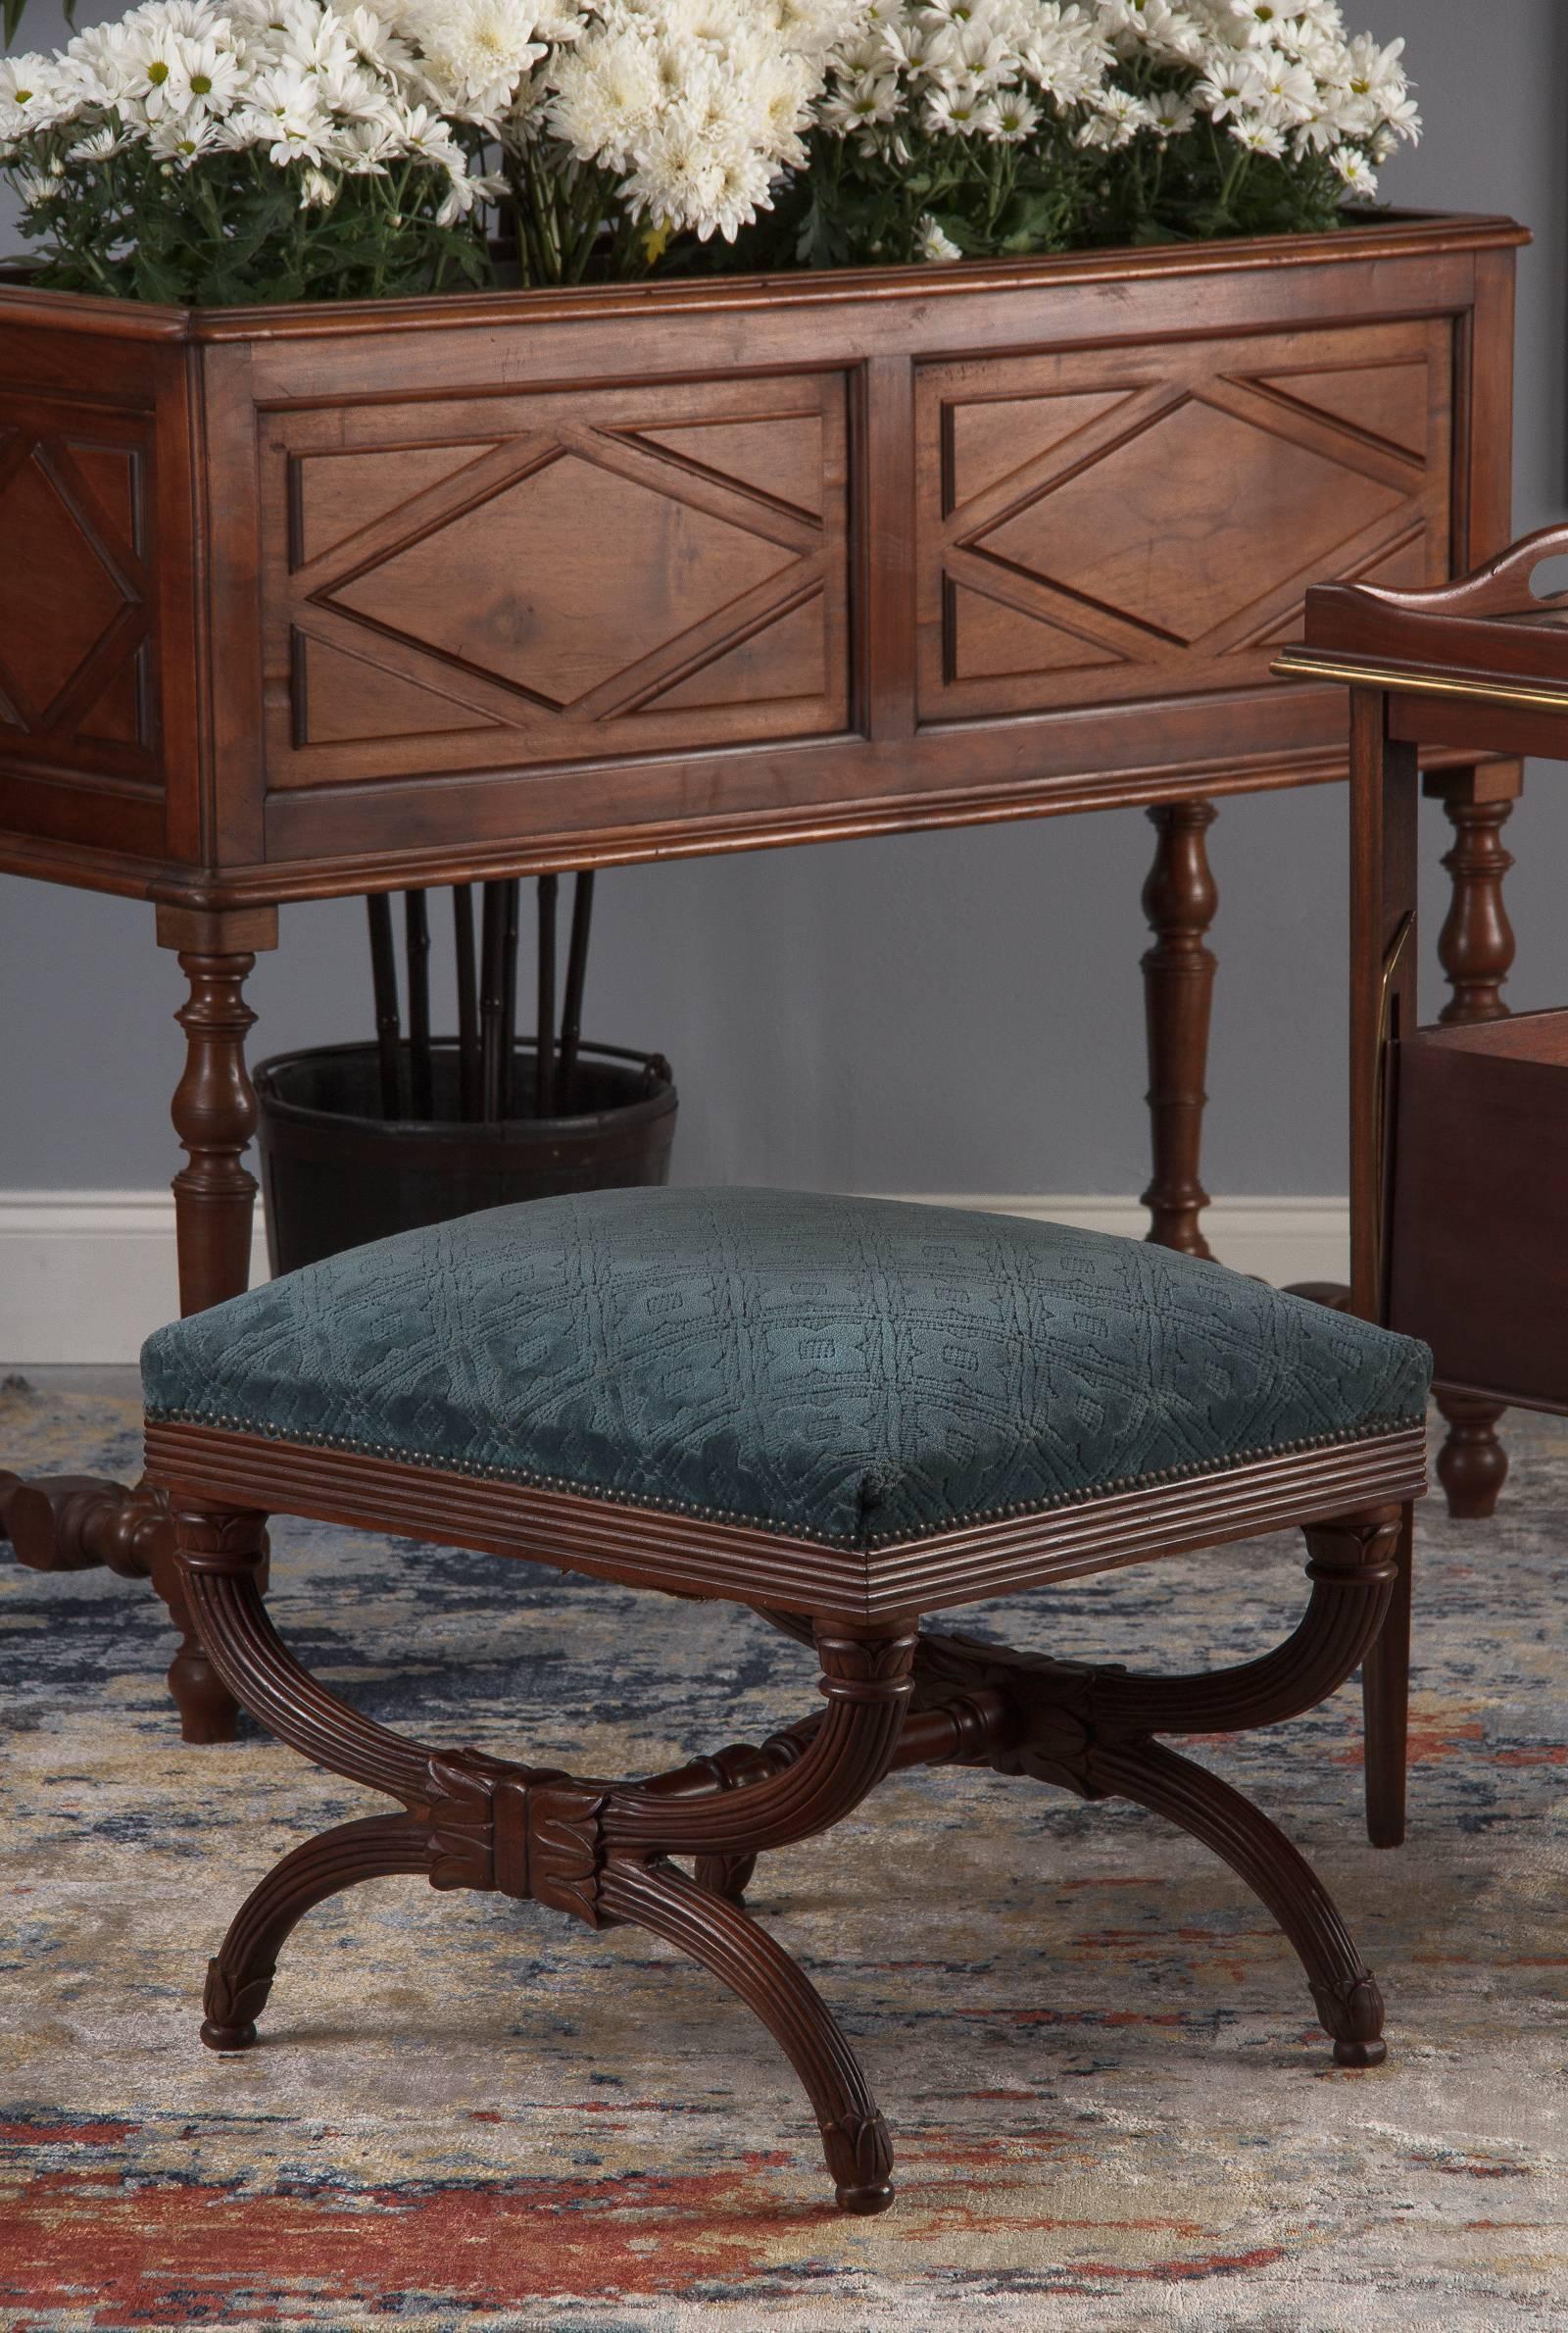 An ornate upholstered Spanish savonarola ottoman in carved walnut, circa 1920. Walnut base with original velvet upholstery over spring seat. The base has a savonarola X-form shape with carved ribbing around the bottom of the seat and along all the